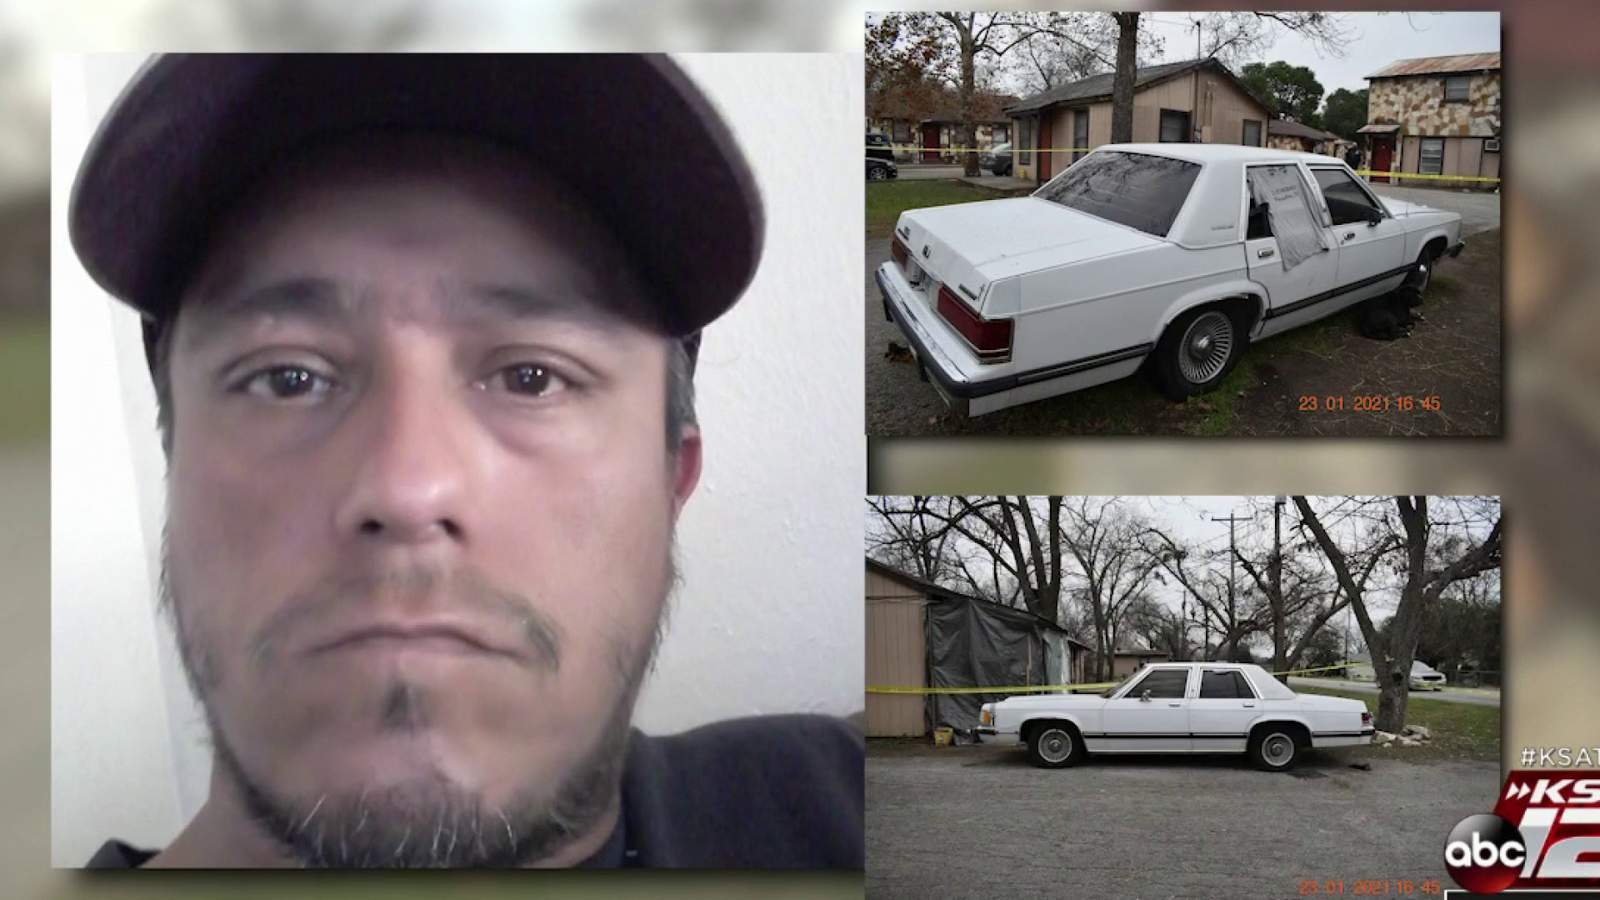 Suspicious death in Seguin ruled homicide after man found dead in vehicle, police say